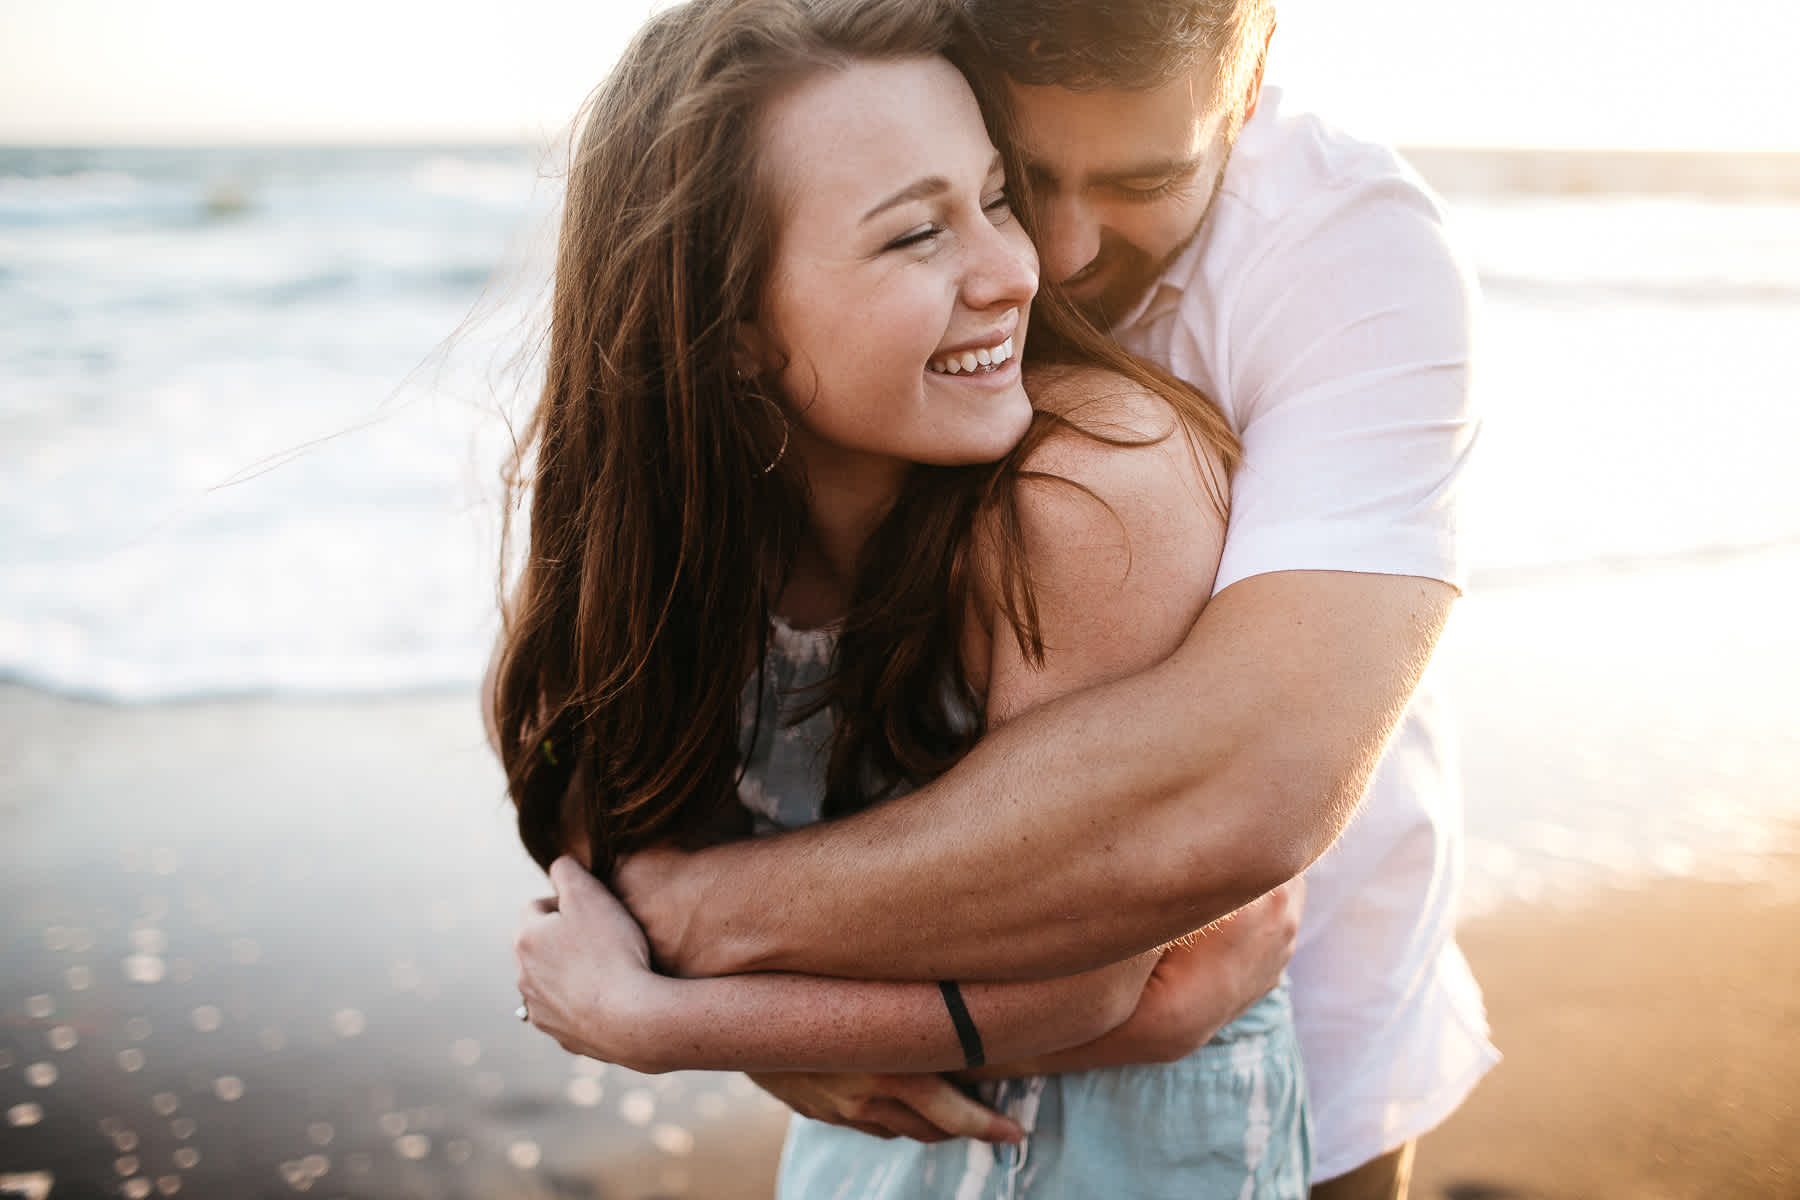 marin-headlands-rodeo-beach-lifestyle-laughter-engagement-session-58